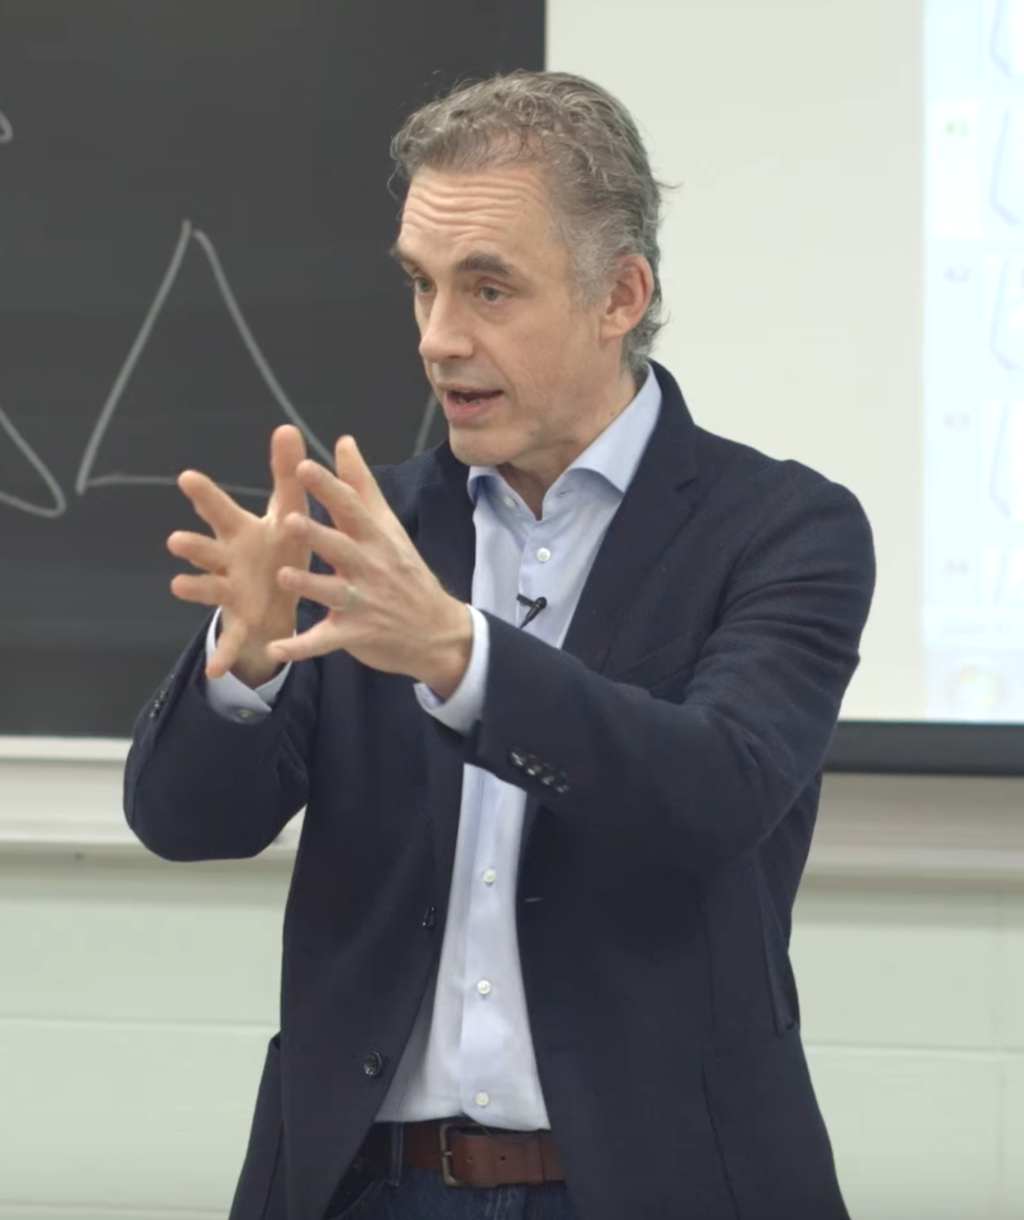 What’s left of what’s right: are we allowed to talk about Jordan Peterson?